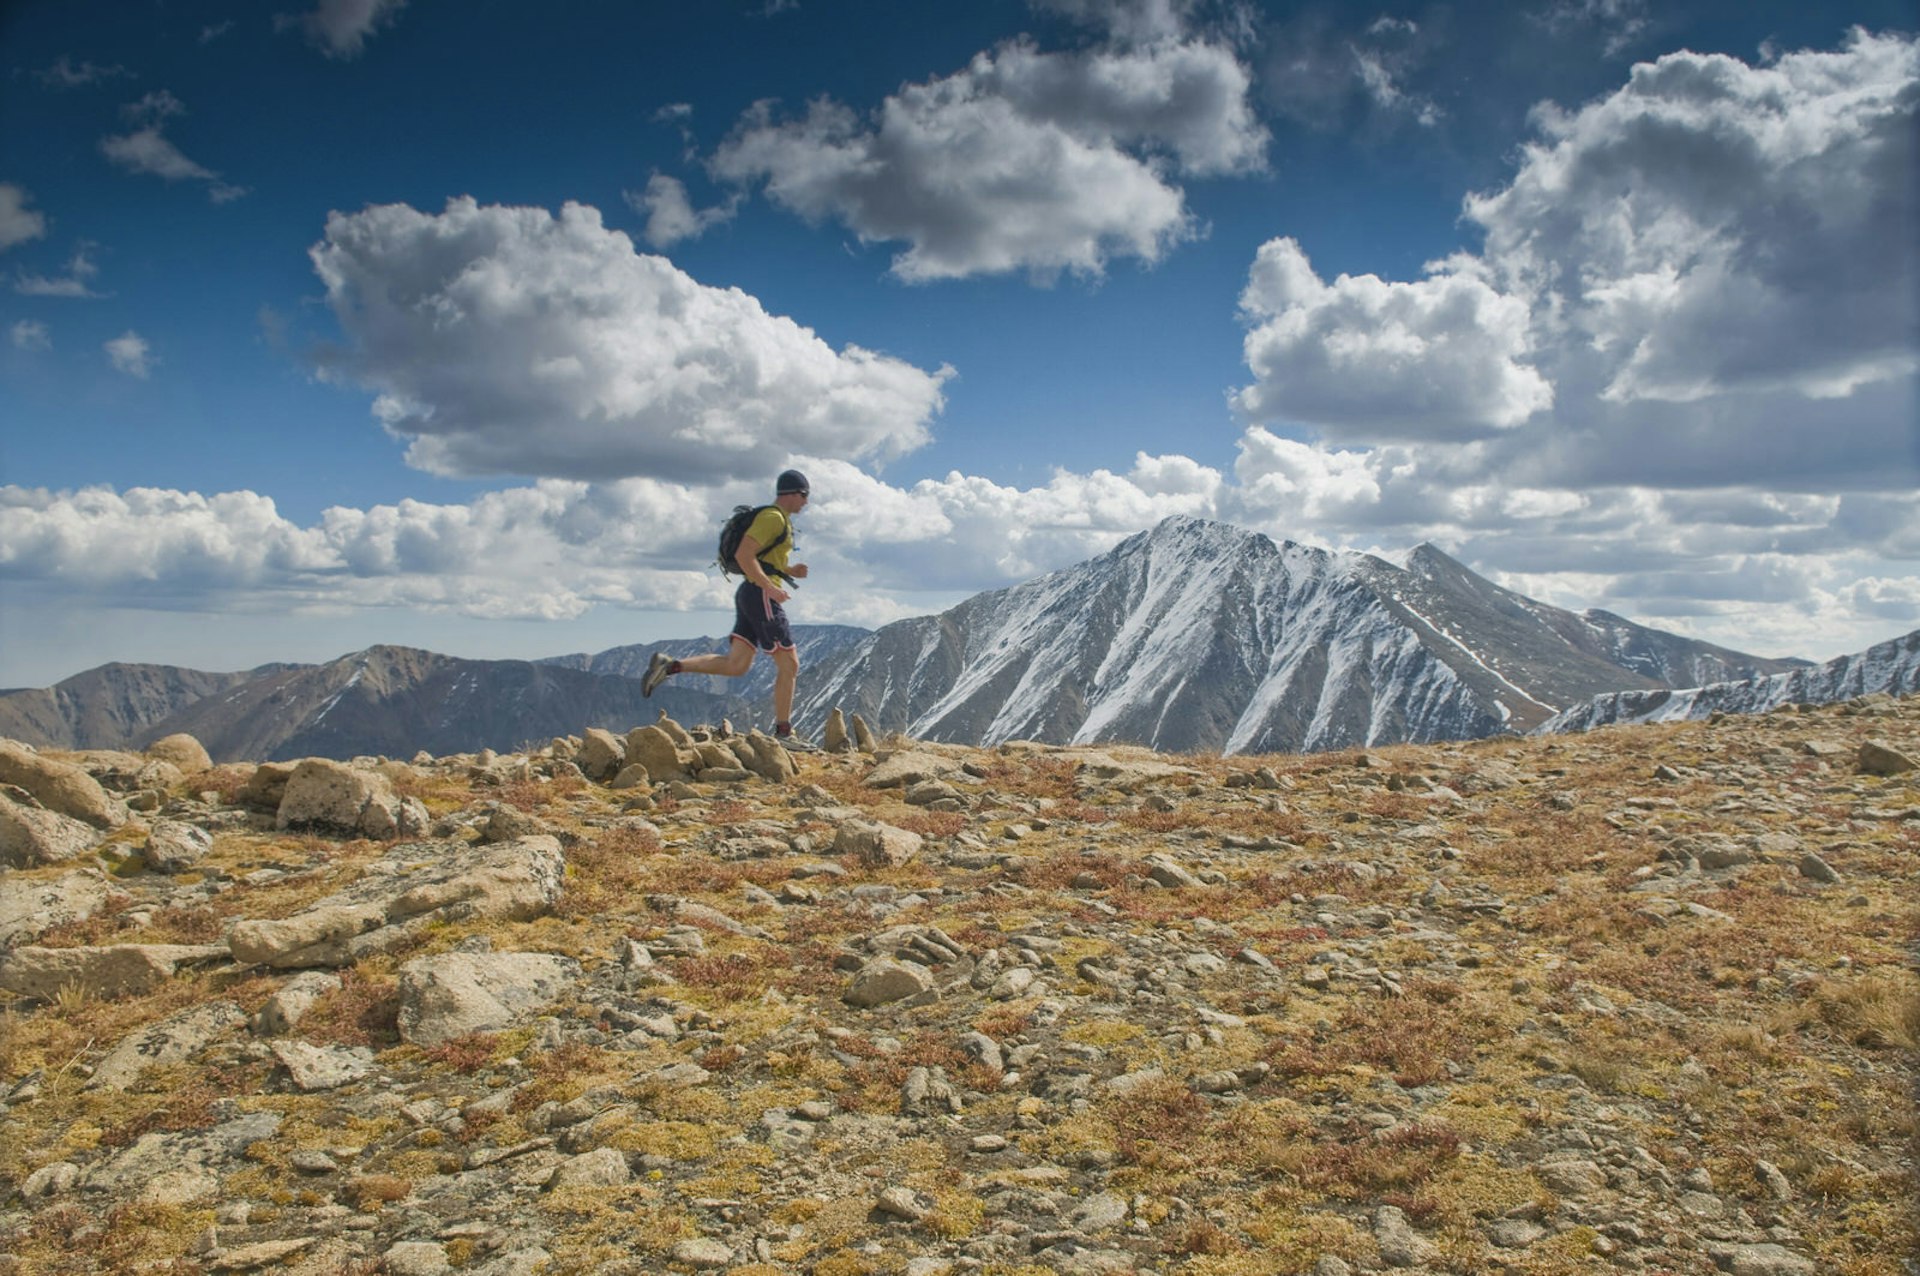 A man runs along an alpine ridge on a crisp Fall day, with Torreys Peak (14,267 ft) in the background © Randall Levensaler / Getty Images